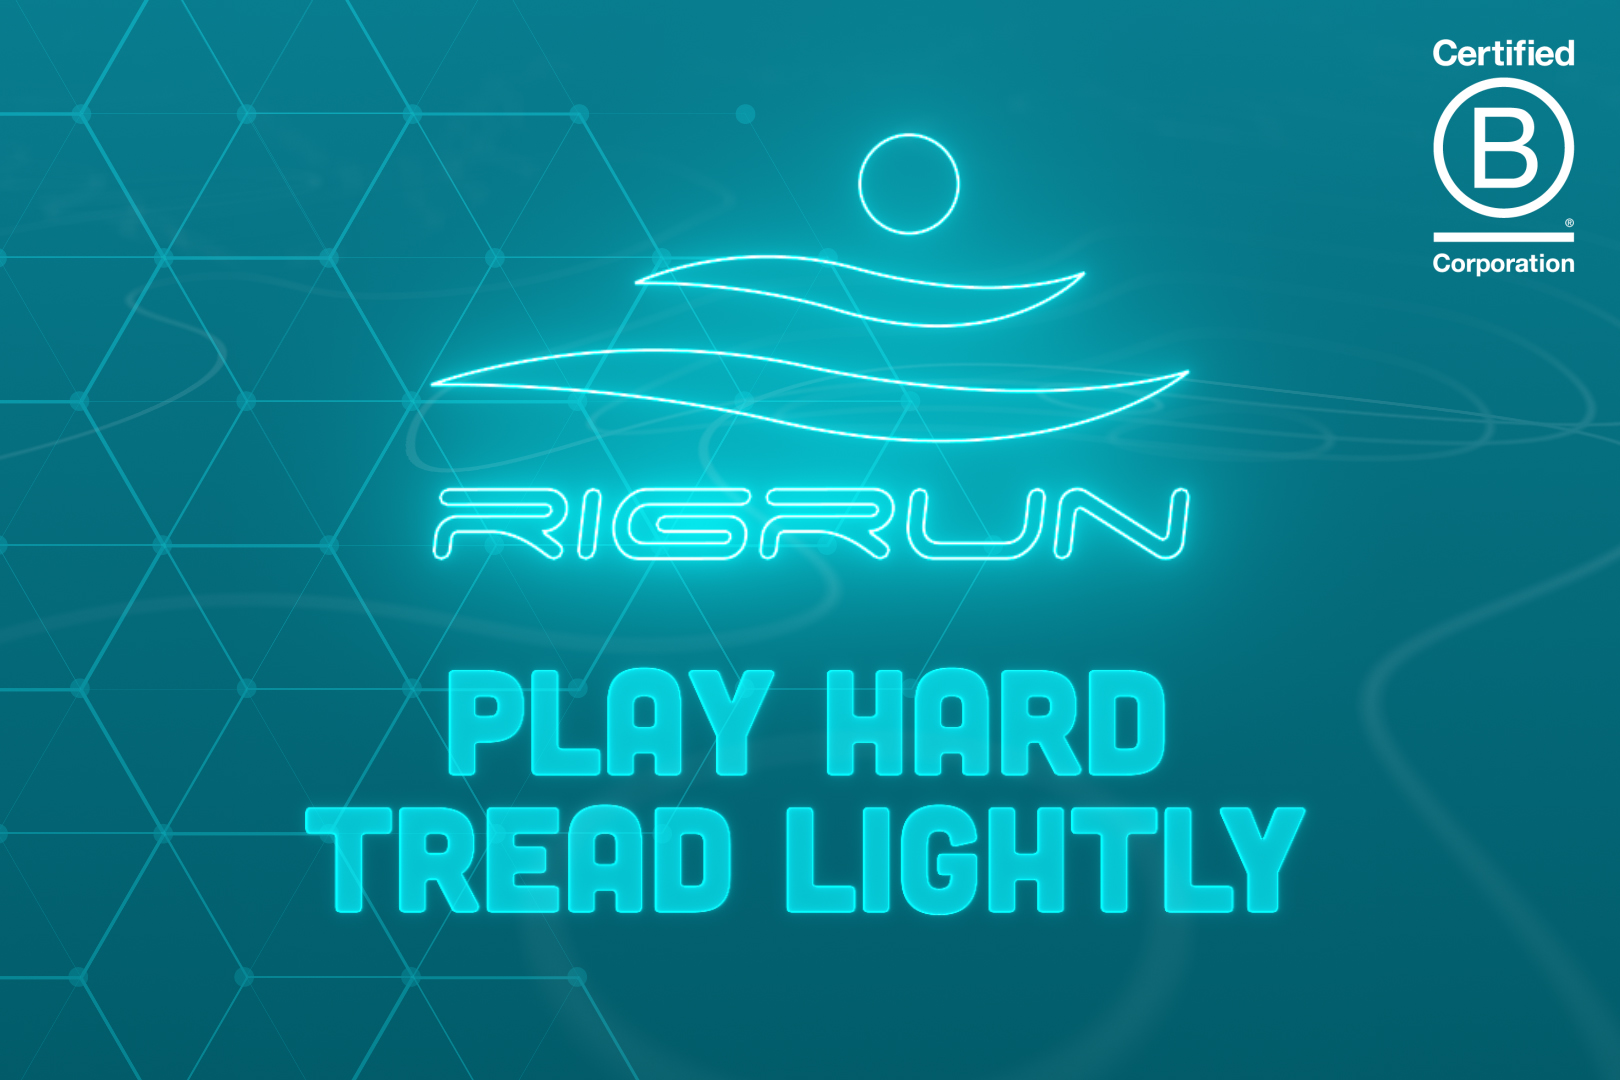 Graphic showing RigRun logo and "Play Hard, Tread Lightly" tagline.